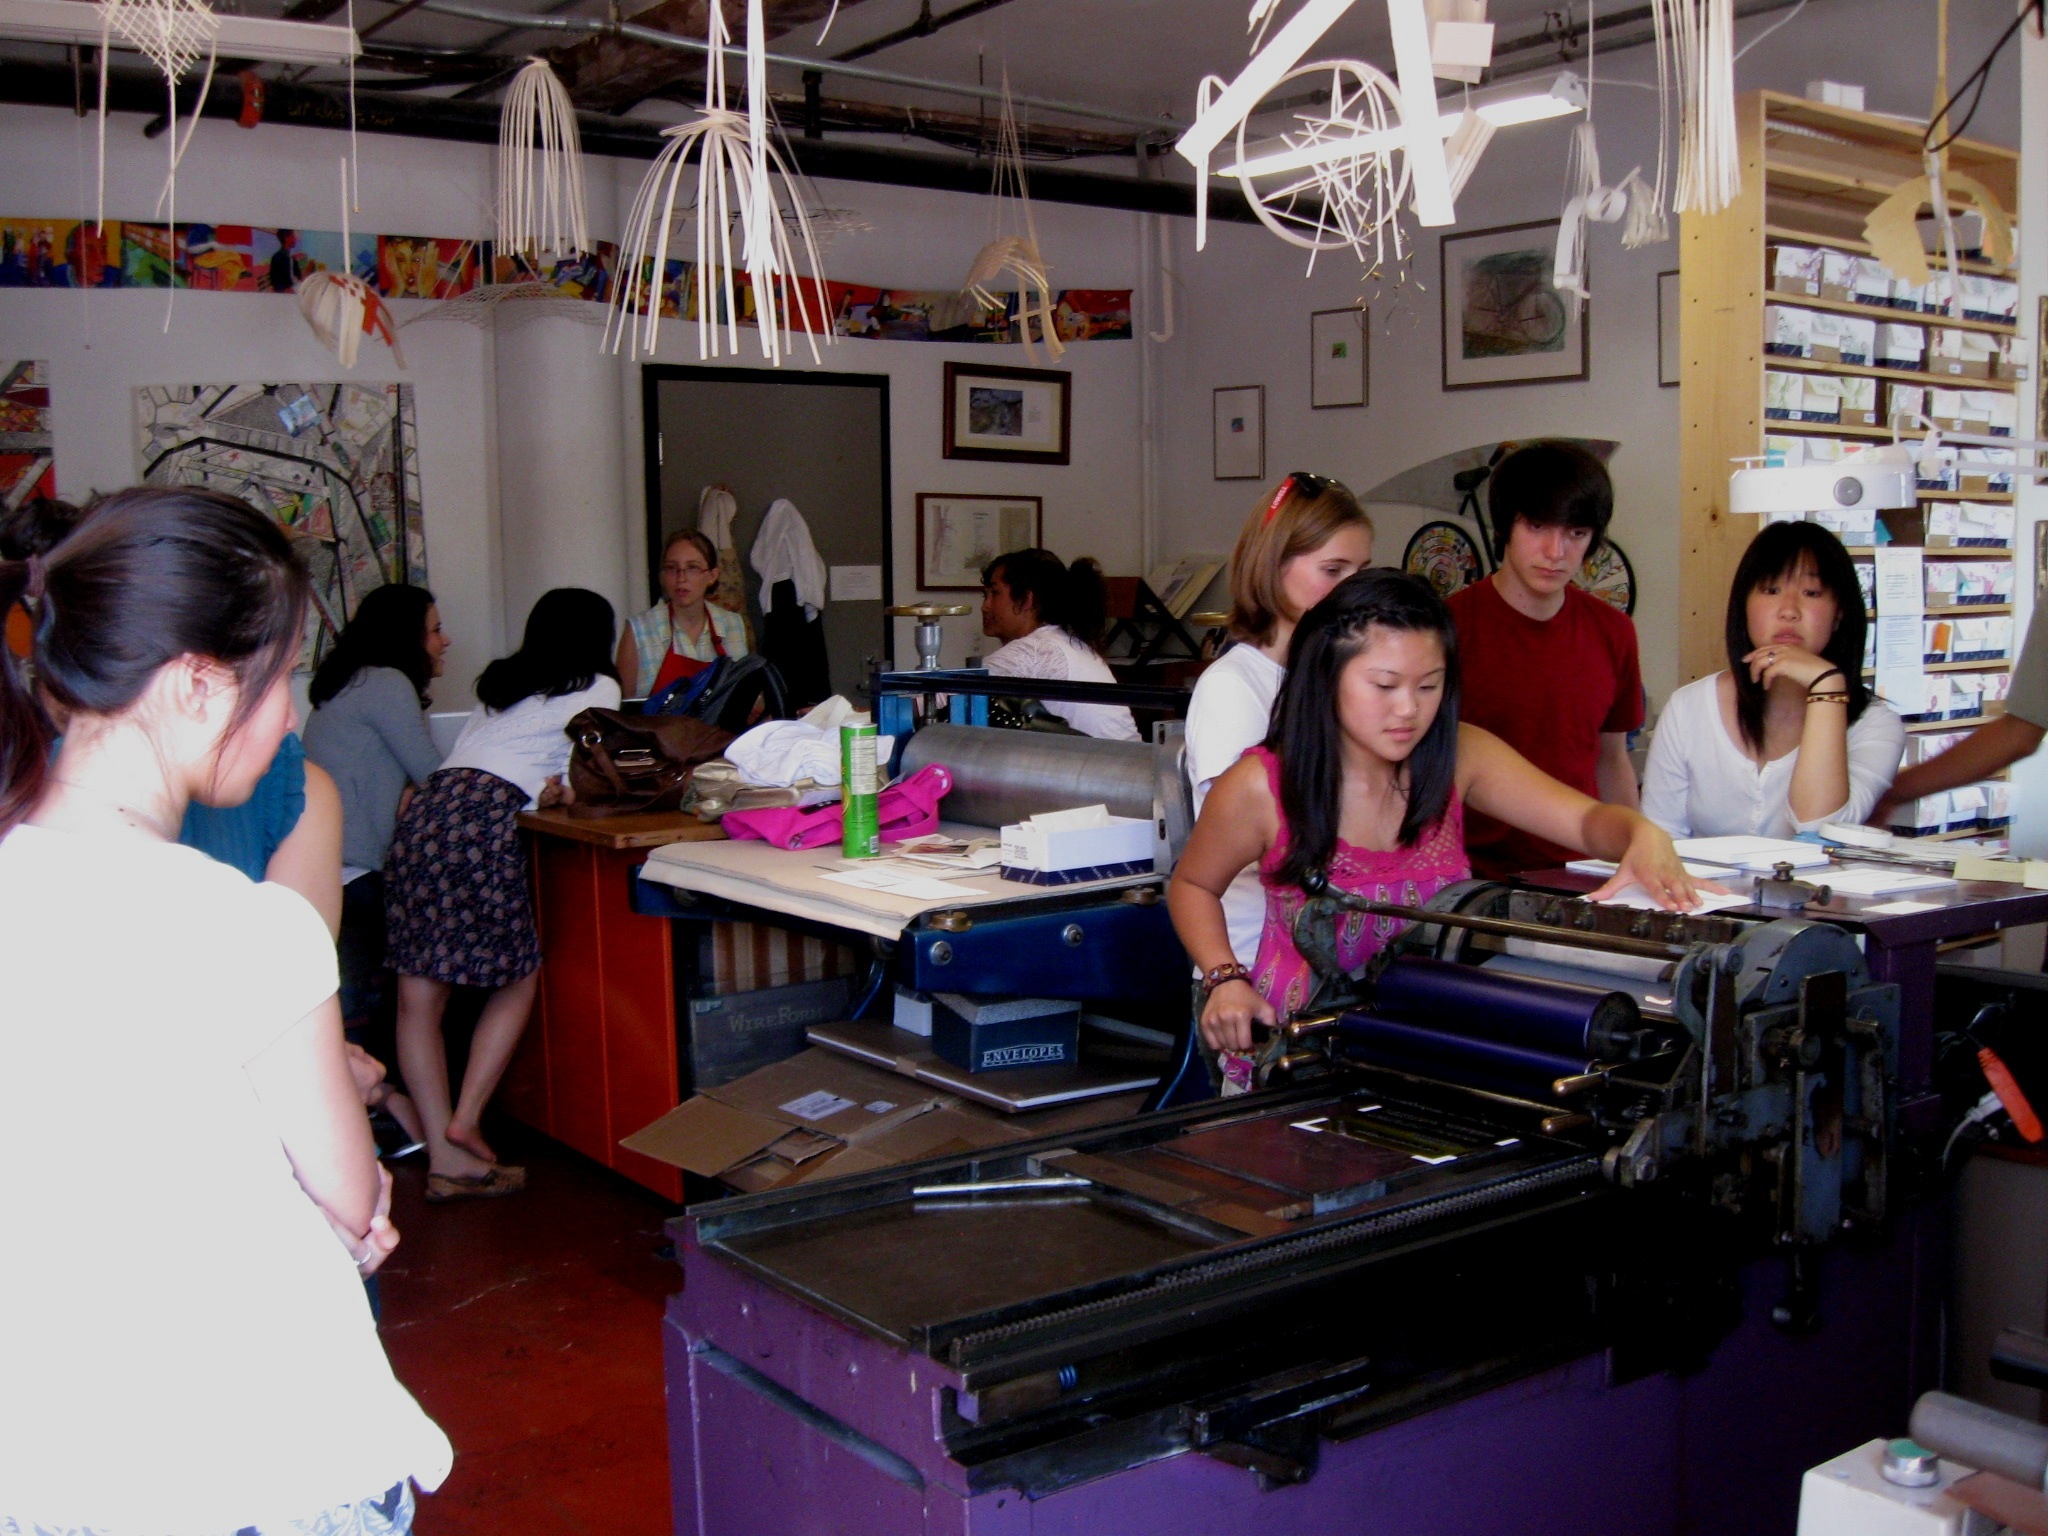 Painted Tongue Press teeming with teens! Students divided into three groups, one at the Vandercook, one at the Heidelberg, and one at the computers.